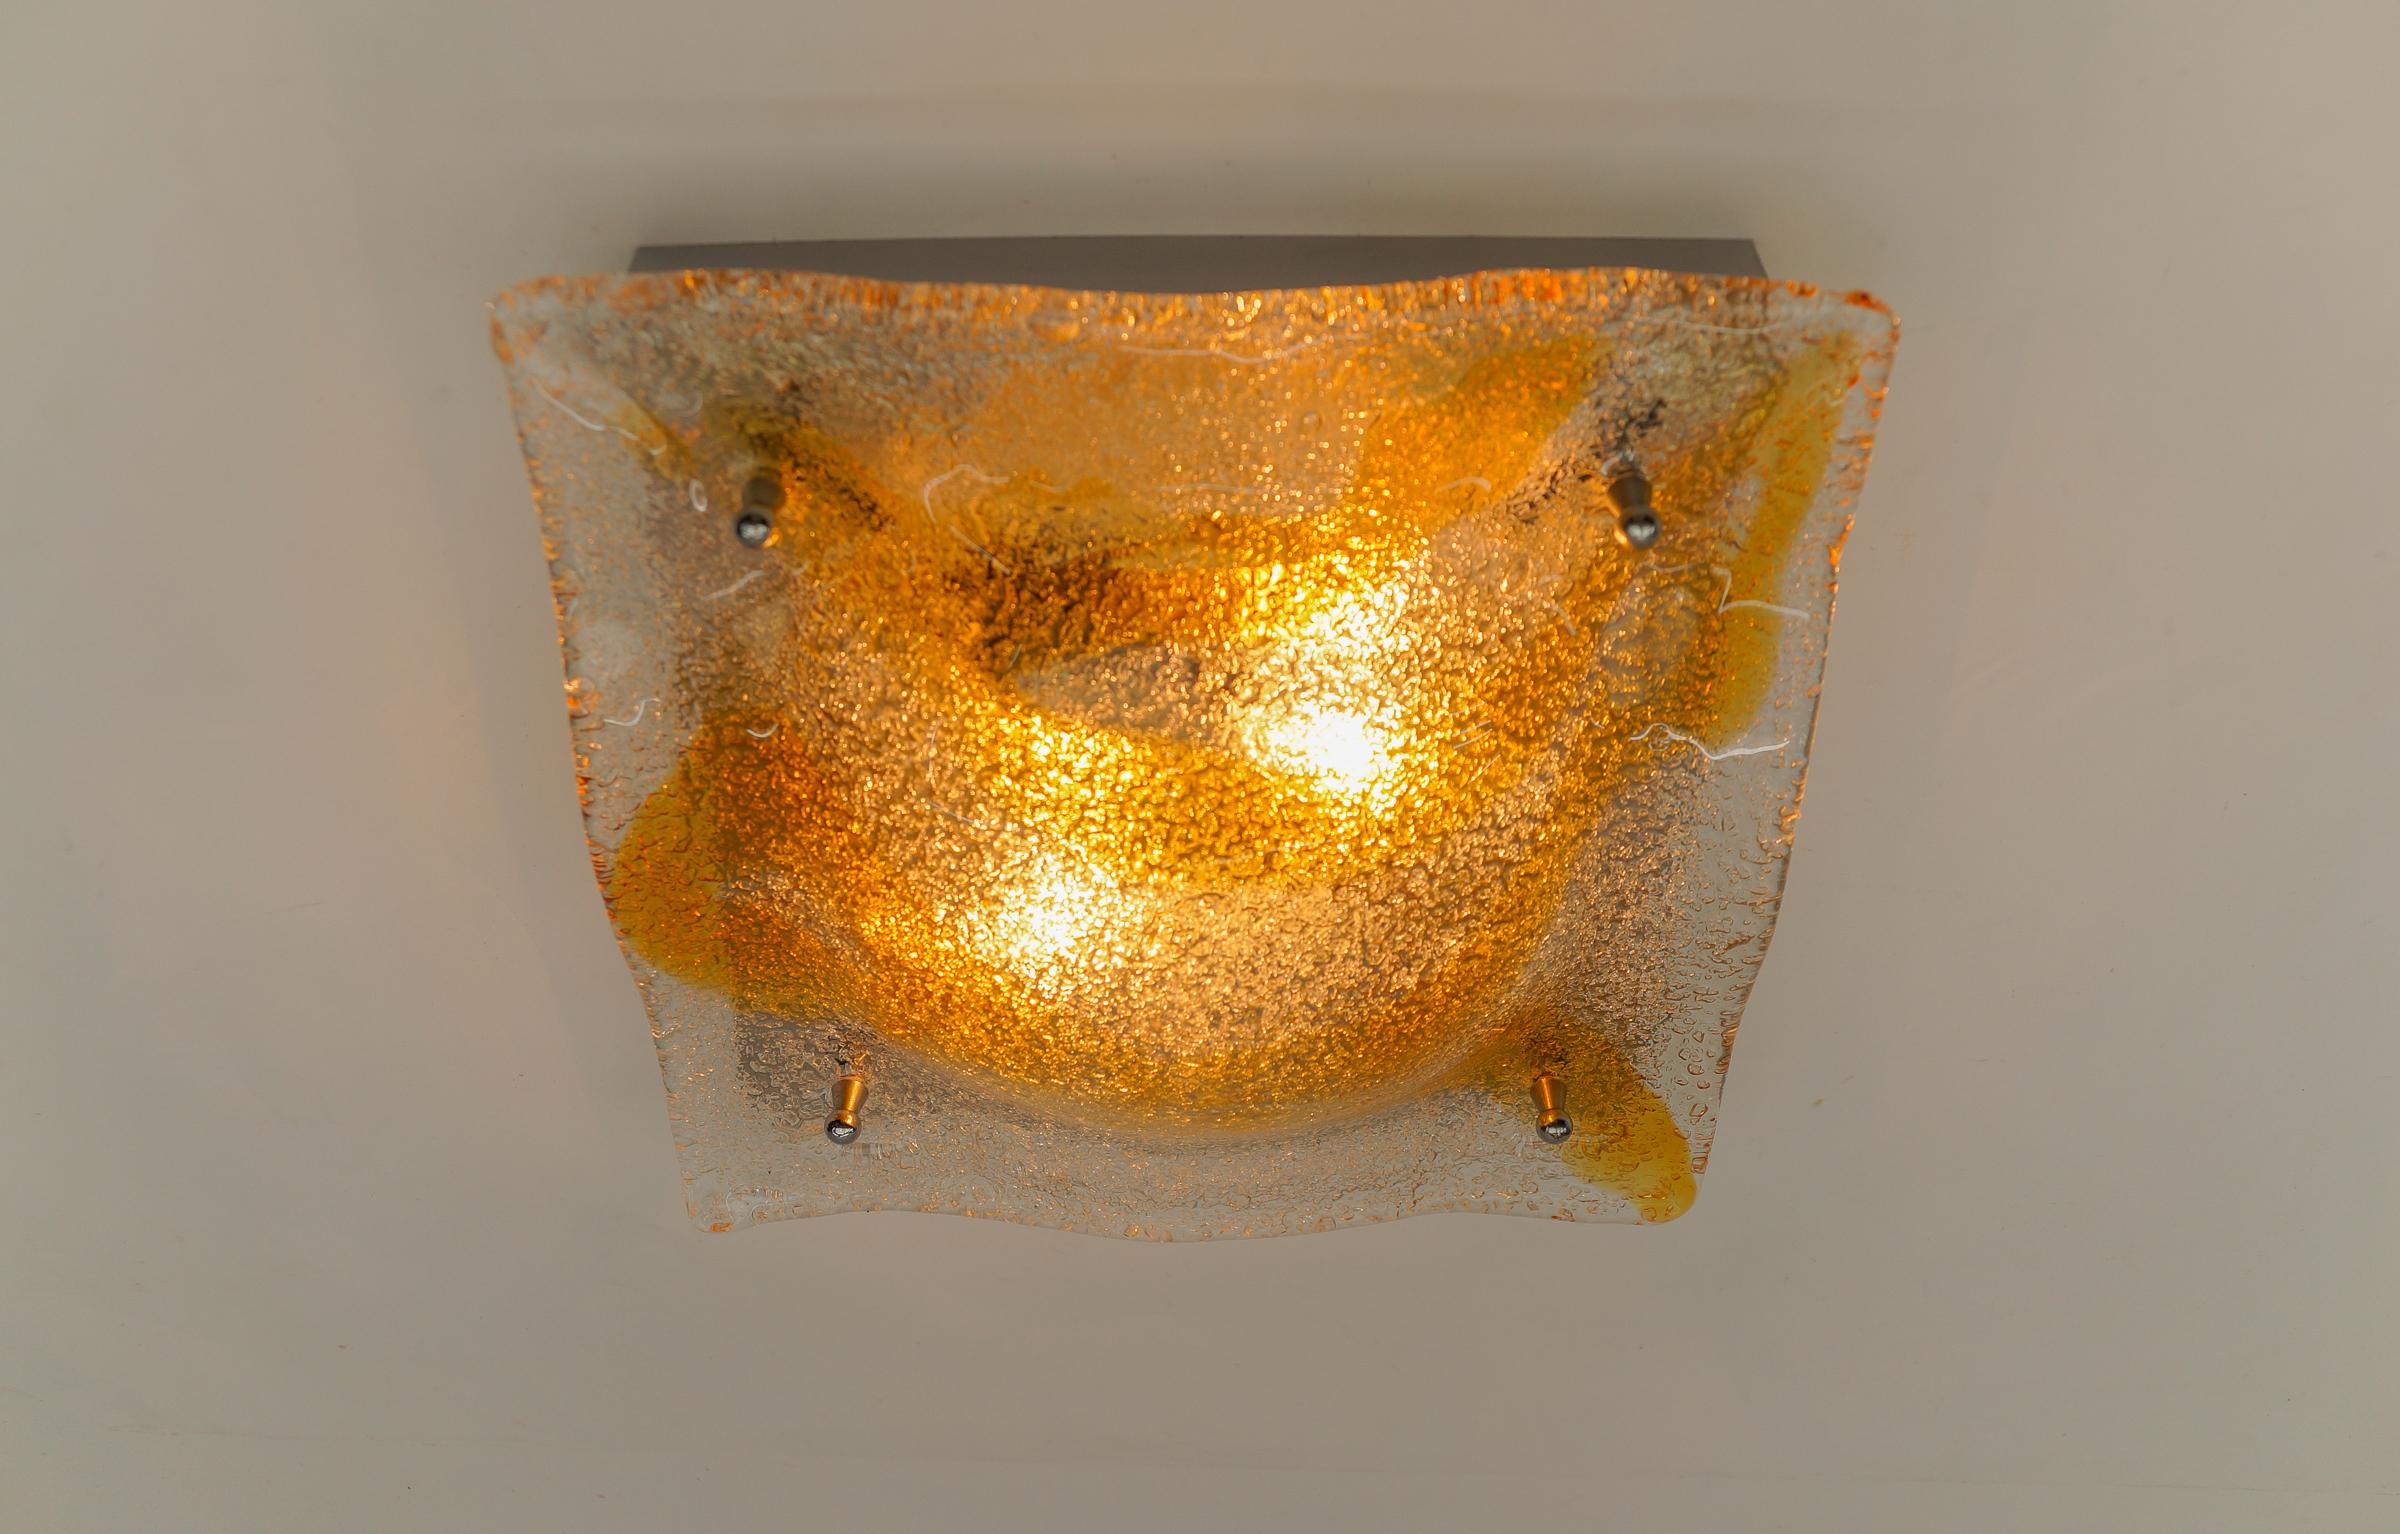 Orange Murano Glass Flush Mount Sconces, Italy, 1960s

The wall lamps come with 1 x E14 / E15 Edison screw fit bulb holder, is wired and in working condition. It runs both on 110/230 Volt. Delivery without bulb.

Our lamps are checked, cleaned and